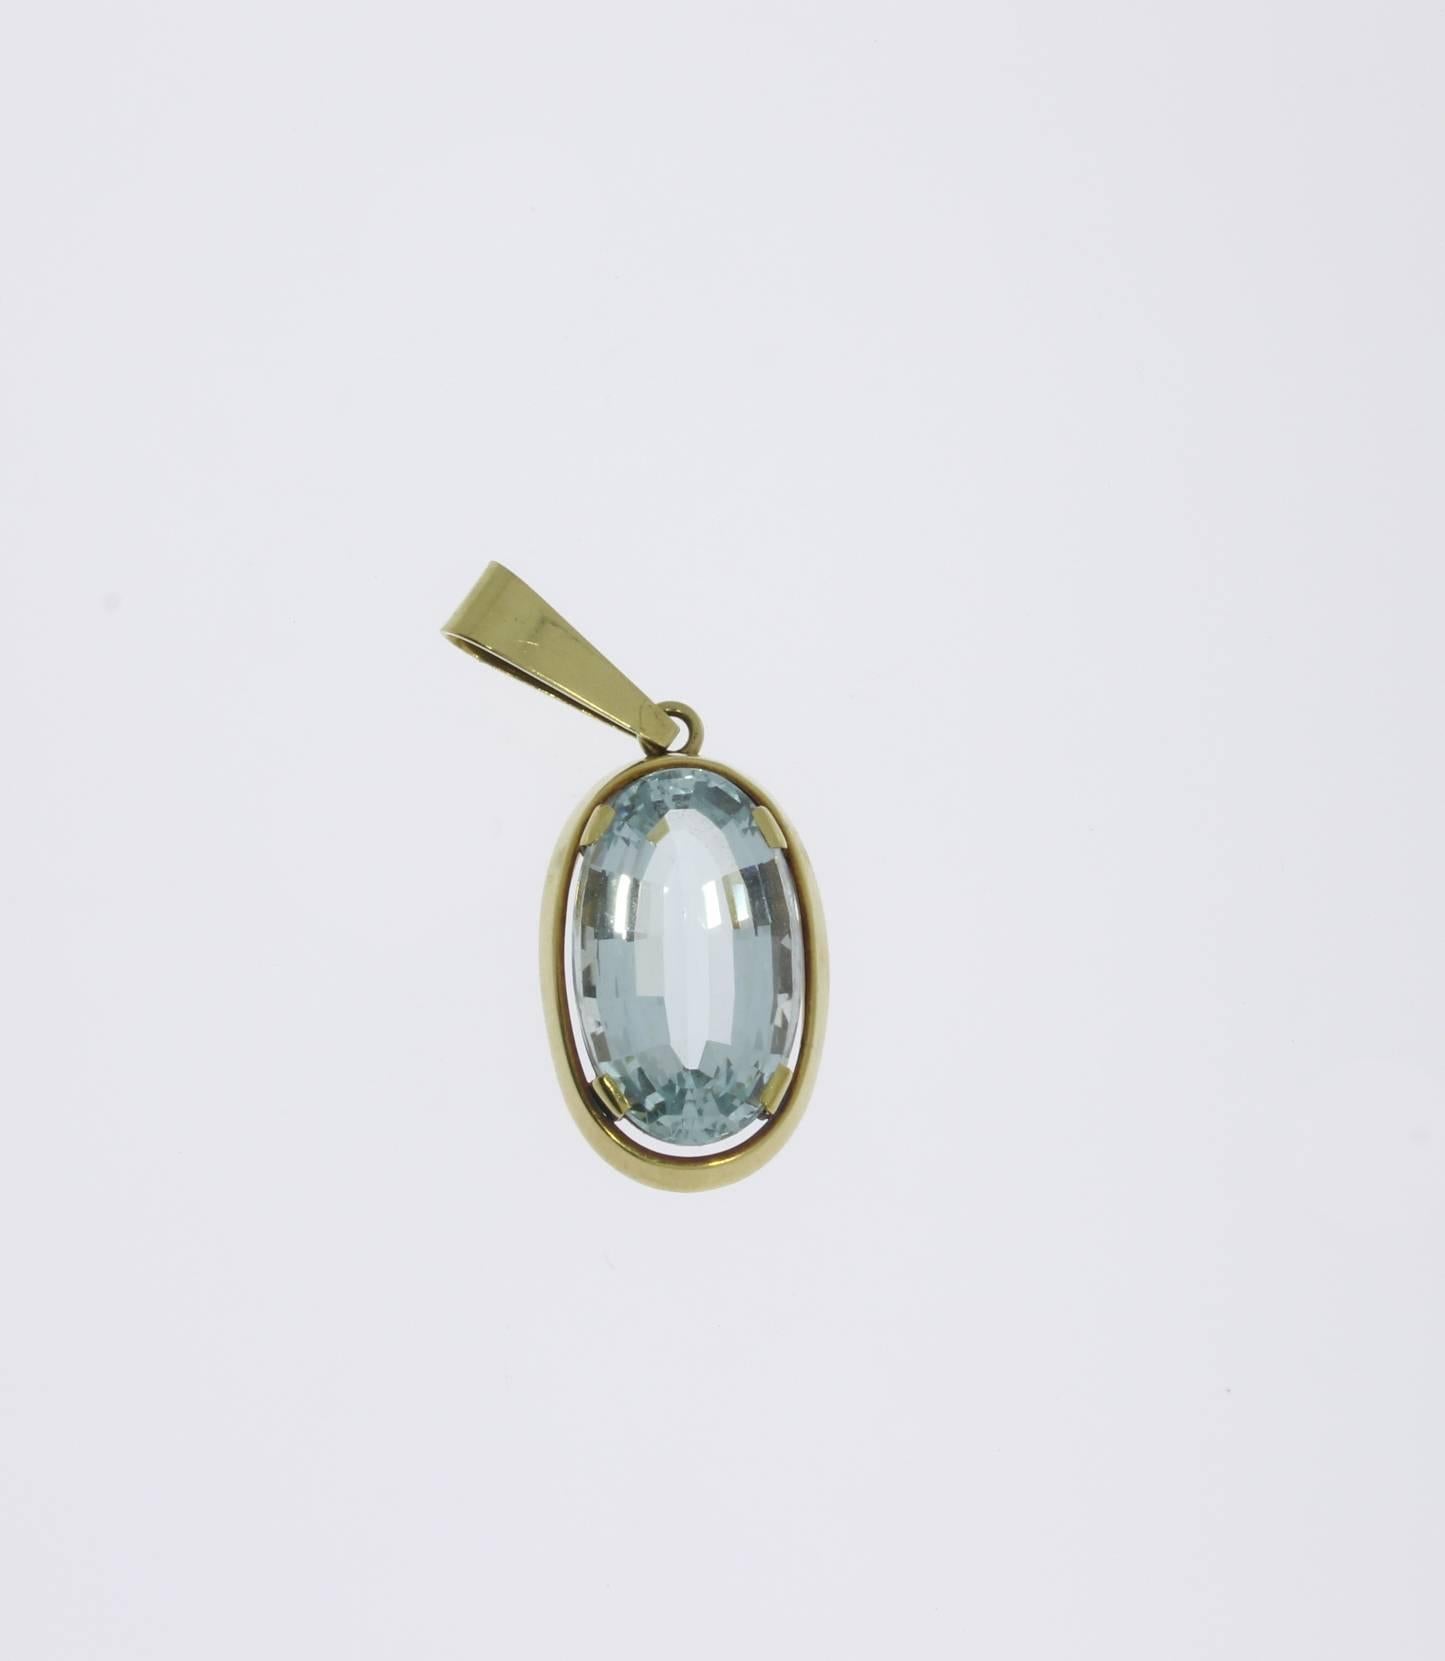 Set with oval shape aquamarine. Mounted in 14 K yellow gold. Marked with the purity 585 on the loop. 
Total weight: 10,61 g. Dimensions: circa 1.85 x 0.71 in ( 4,7 x 1,8 cm ), Height: 0.43 in ( 1,1 cm )